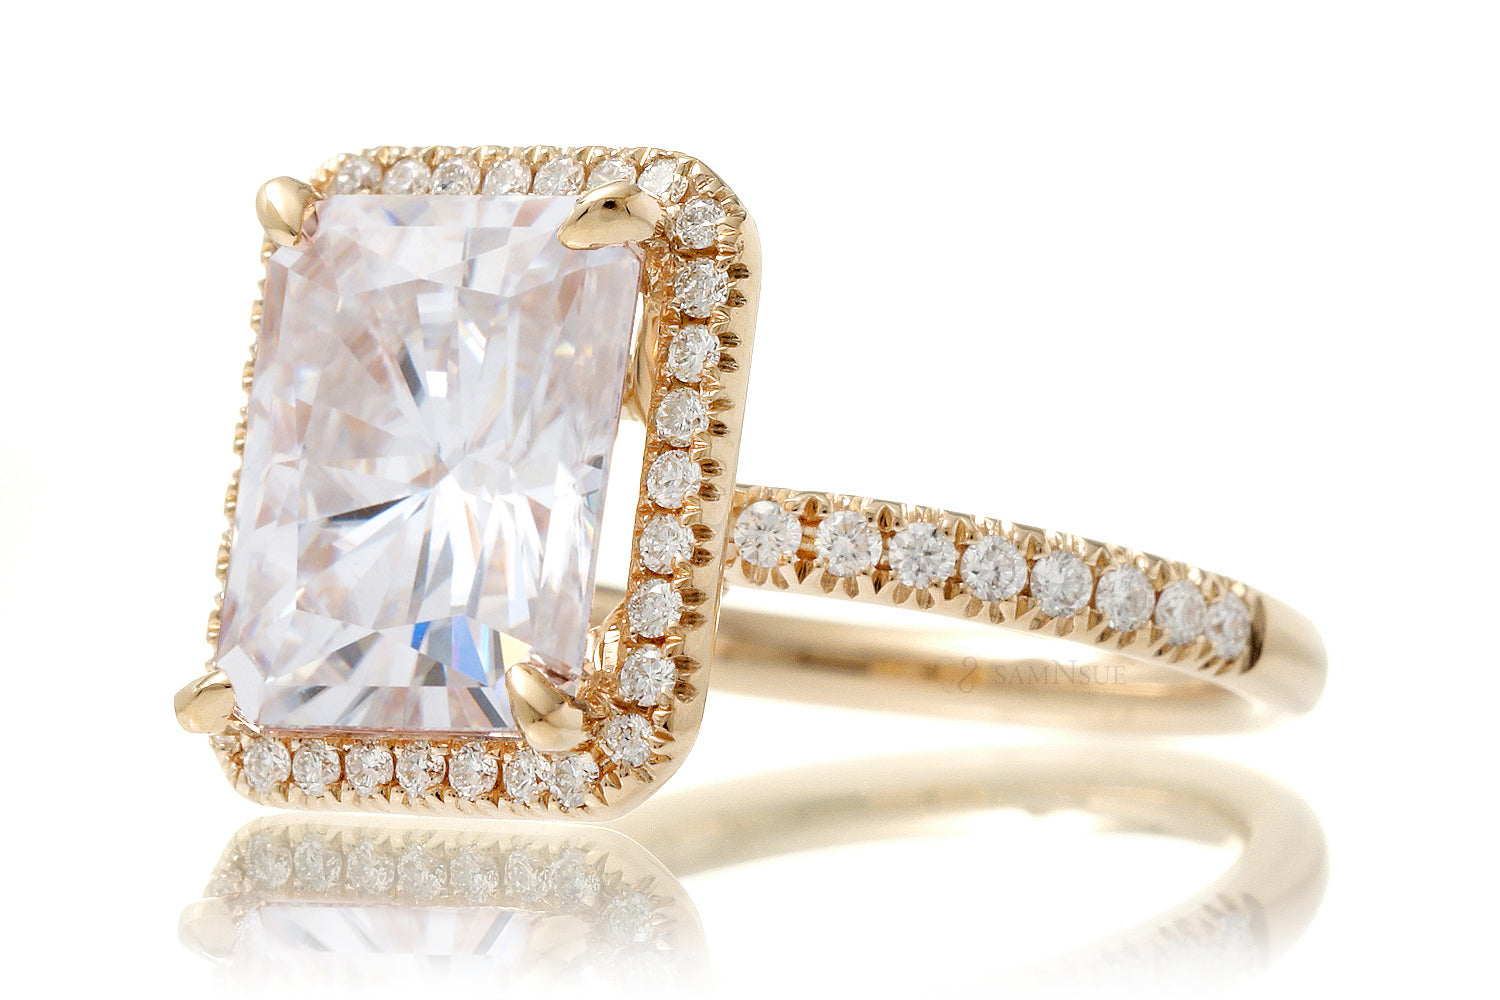 The Drenched Emerald Cut Lab-Grown Diamond